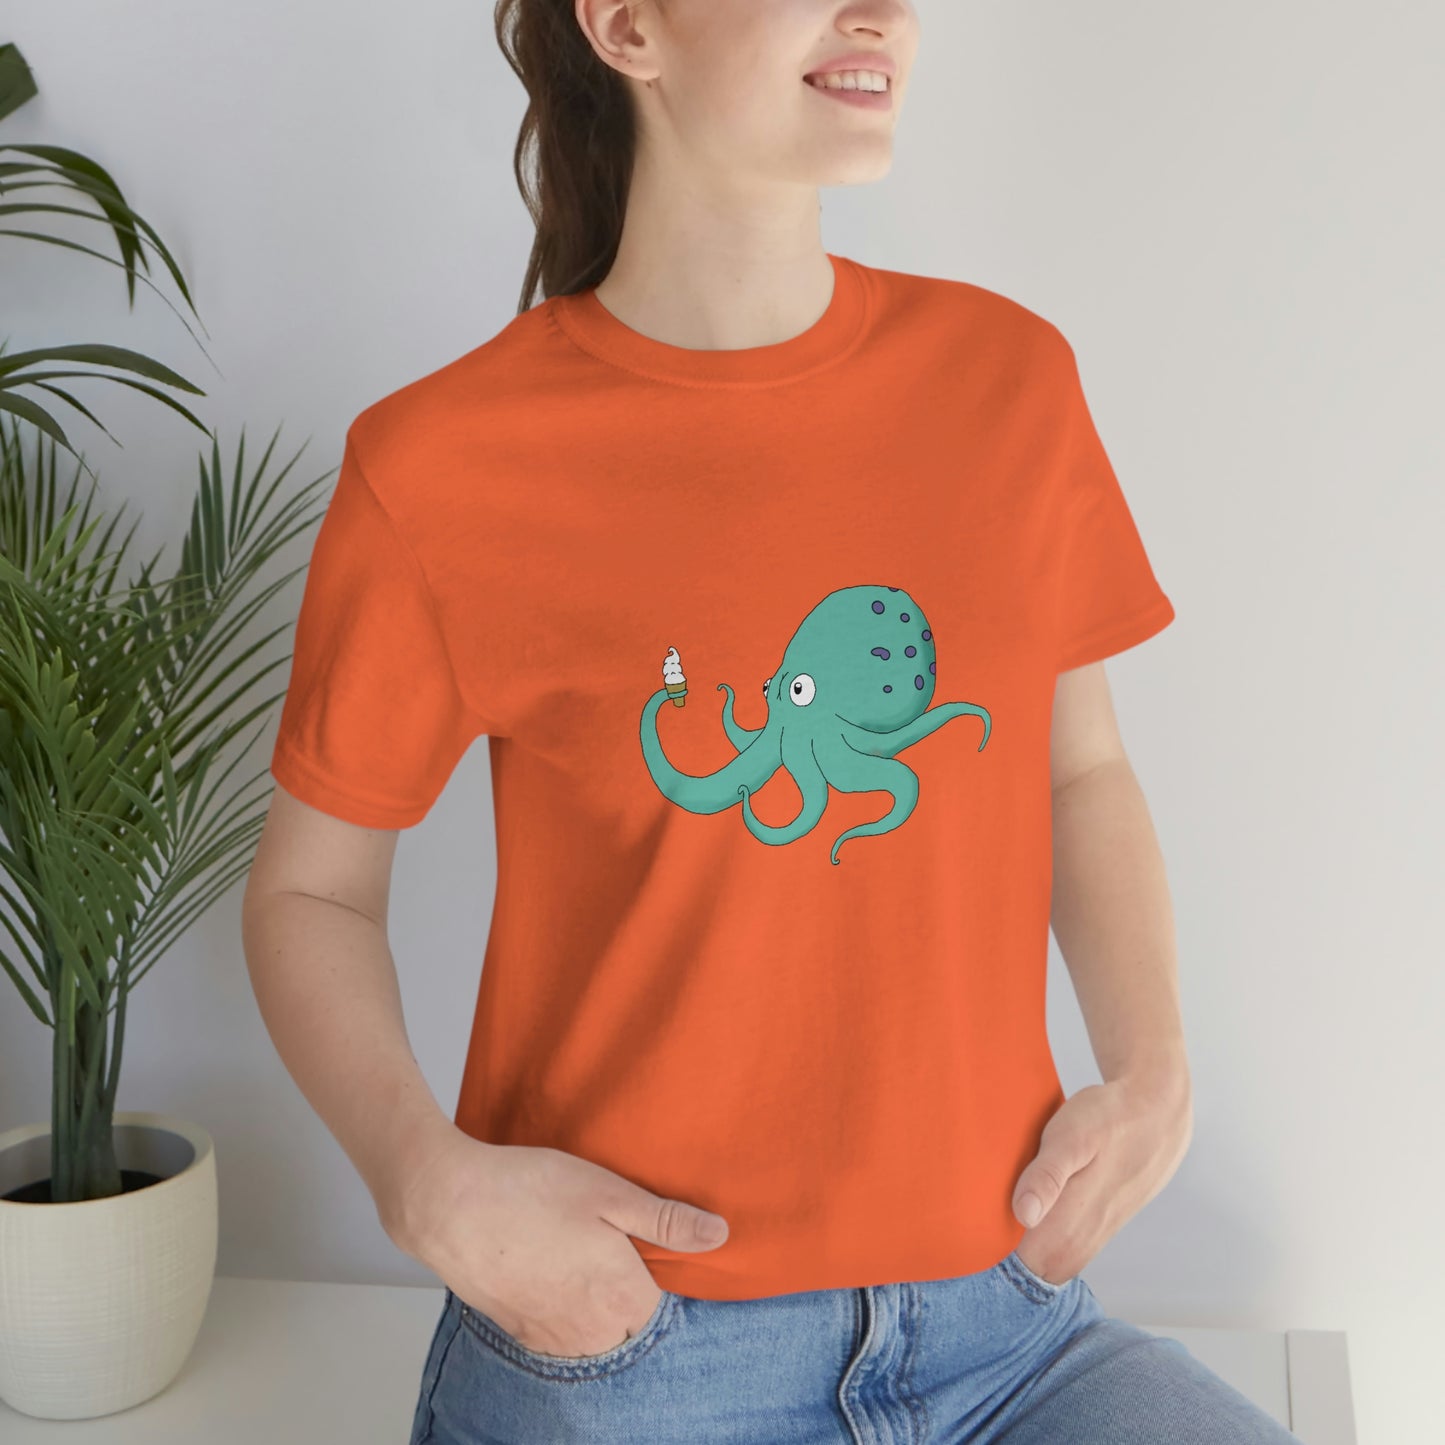 Curious Octopus Cartoon Unisex Tshirt Lord and Lady Towers